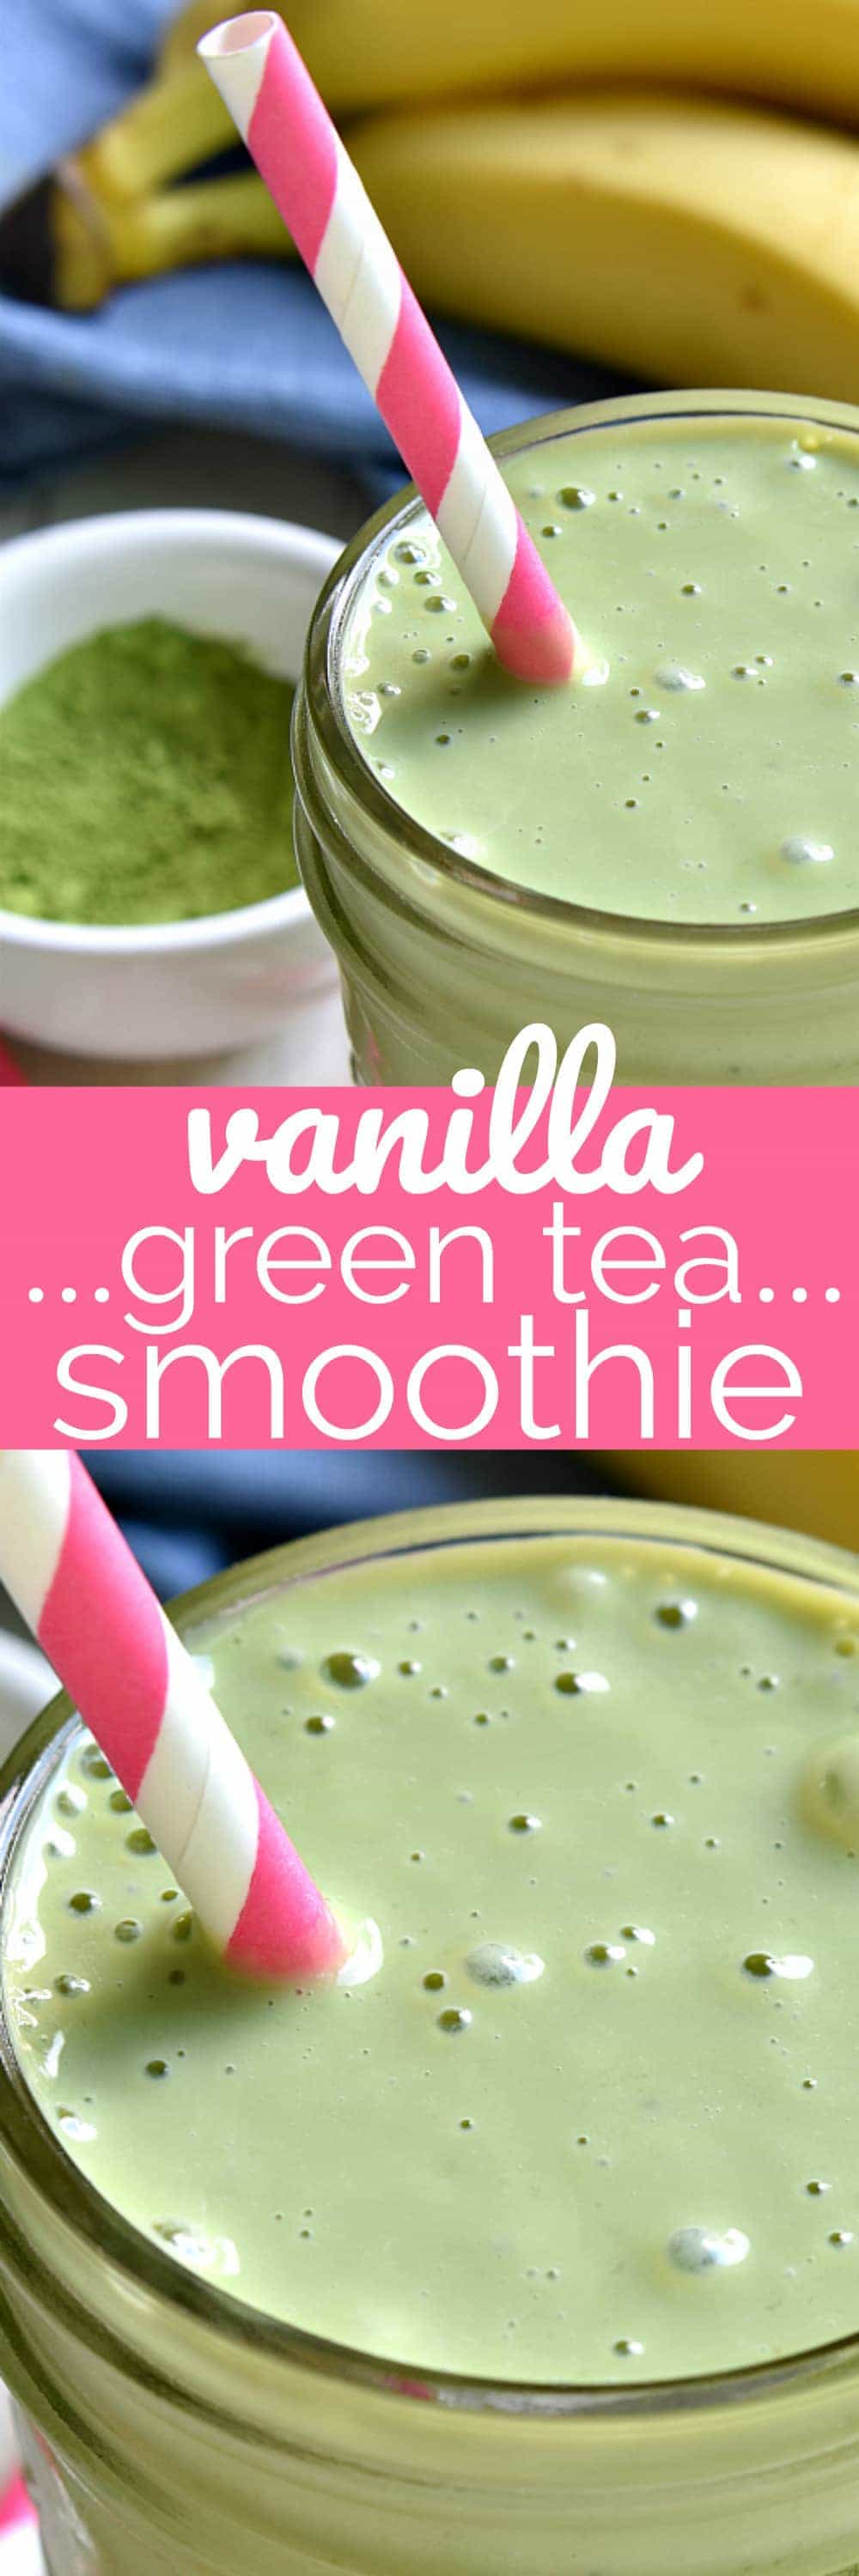 This Vanilla Green Tea Smoothie combines the classic flavors of green tea and vanilla in a rich, creamy smoothie that's both healthy and delicious! Perfect for breakfast or an afternoon pick me up!